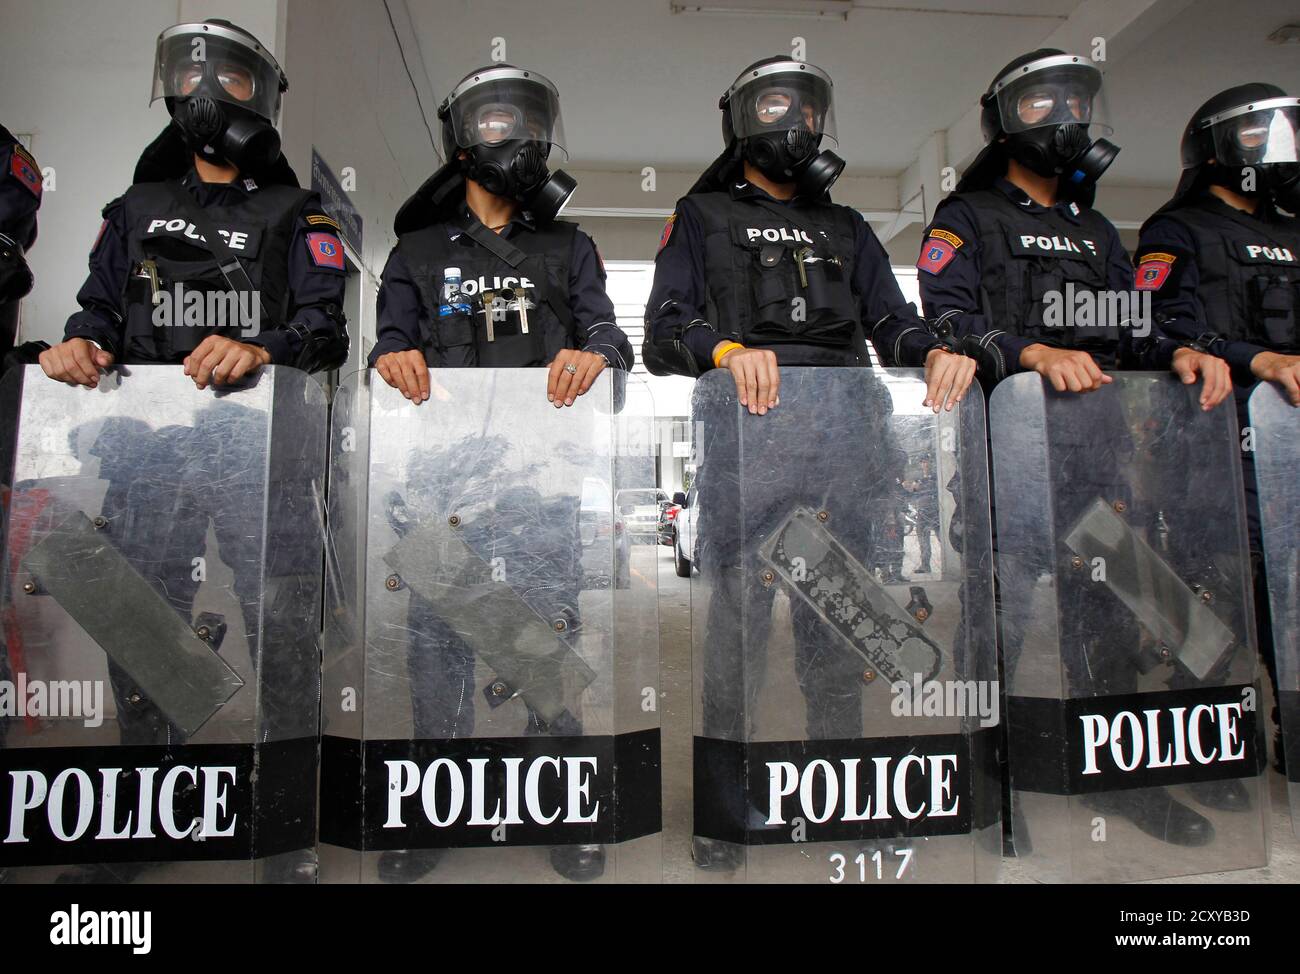 Riot police officers, wearing gas masks, stand with their shields during a demonstration for the media at the Royal Thai Police Sport Club in Bangkok January 7, 2014. Police organized the media demonstration to showcase teargas and rubber bullets, the only type of weaponry authorities say is being used for crowd-control situations. Police added that no riot police officers are allowed to carry live ammunition. According to authorities 20,000 police officers, backed up by troops, will be deployed in the streets on January 13, the first day of the planned "shutdown". REUTERS/Chaiwat Subprasom (T Foto de stock